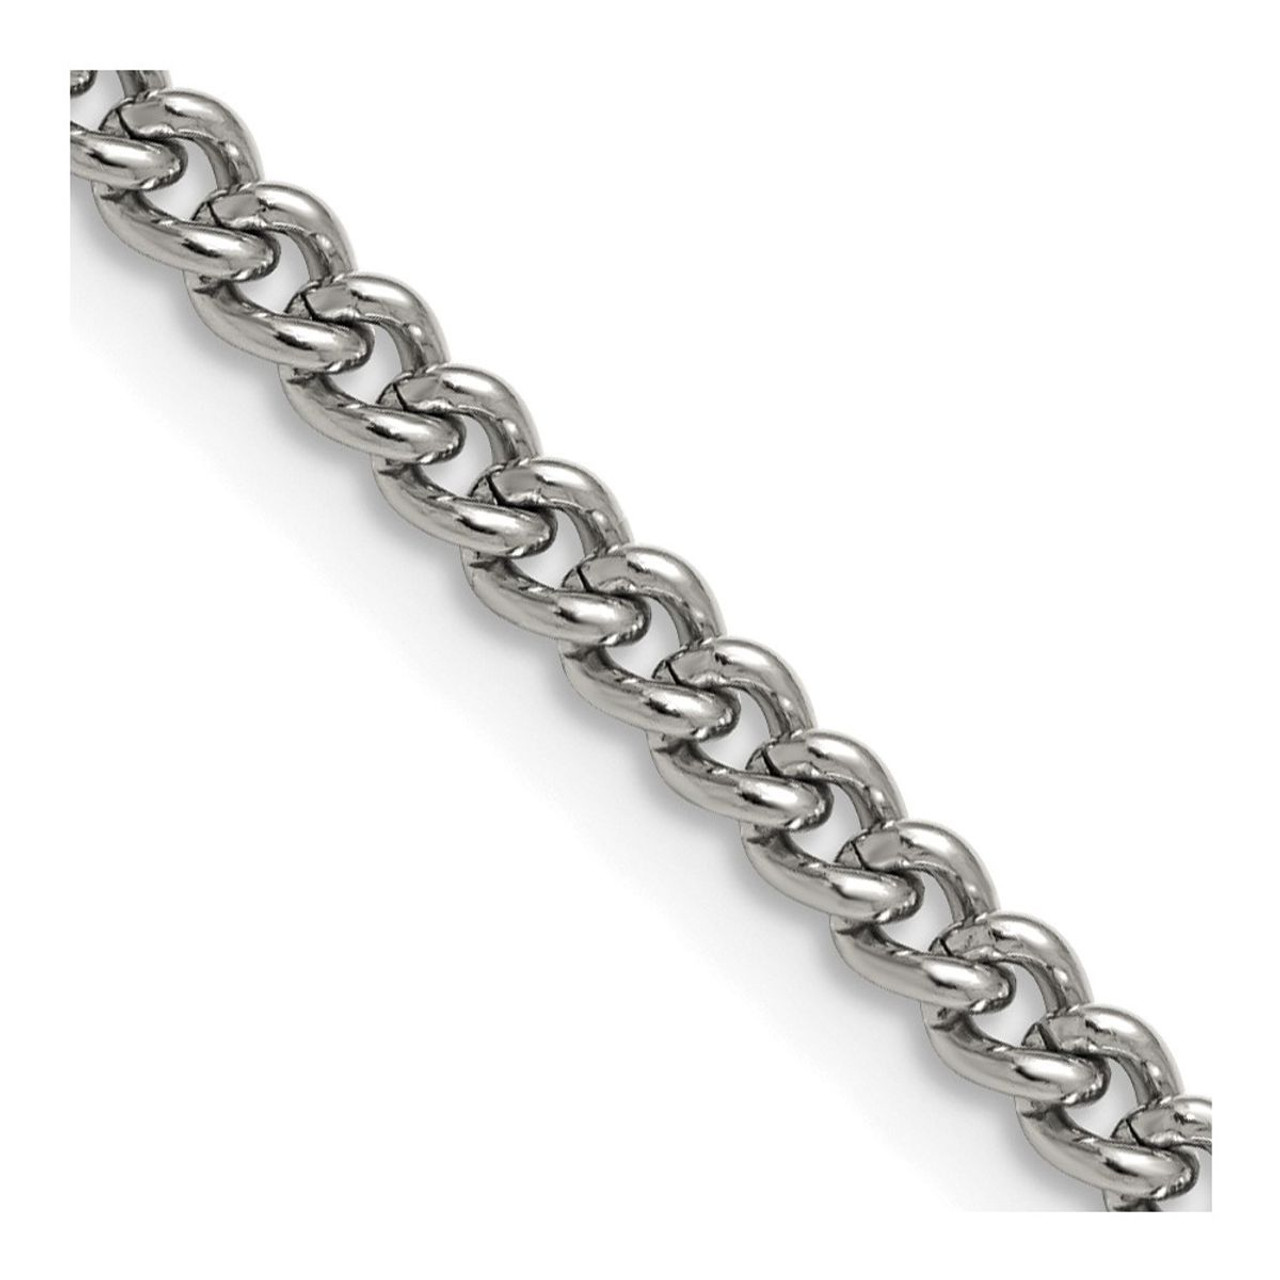 Stainless Steel Polished 4mm Round Curb Chain product image